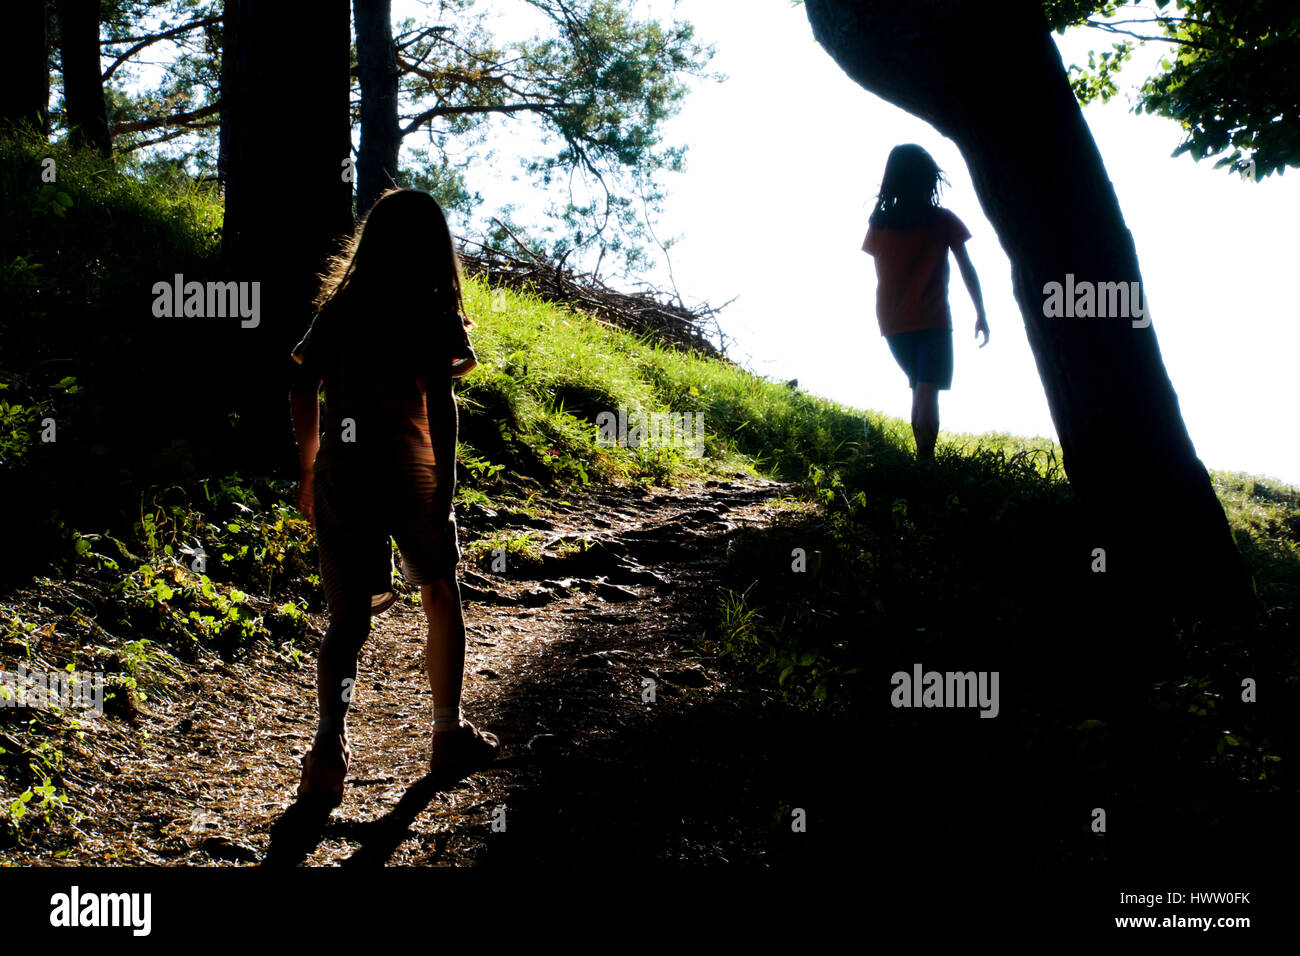 Hiking in the evening with two preteen girls Stock Photo